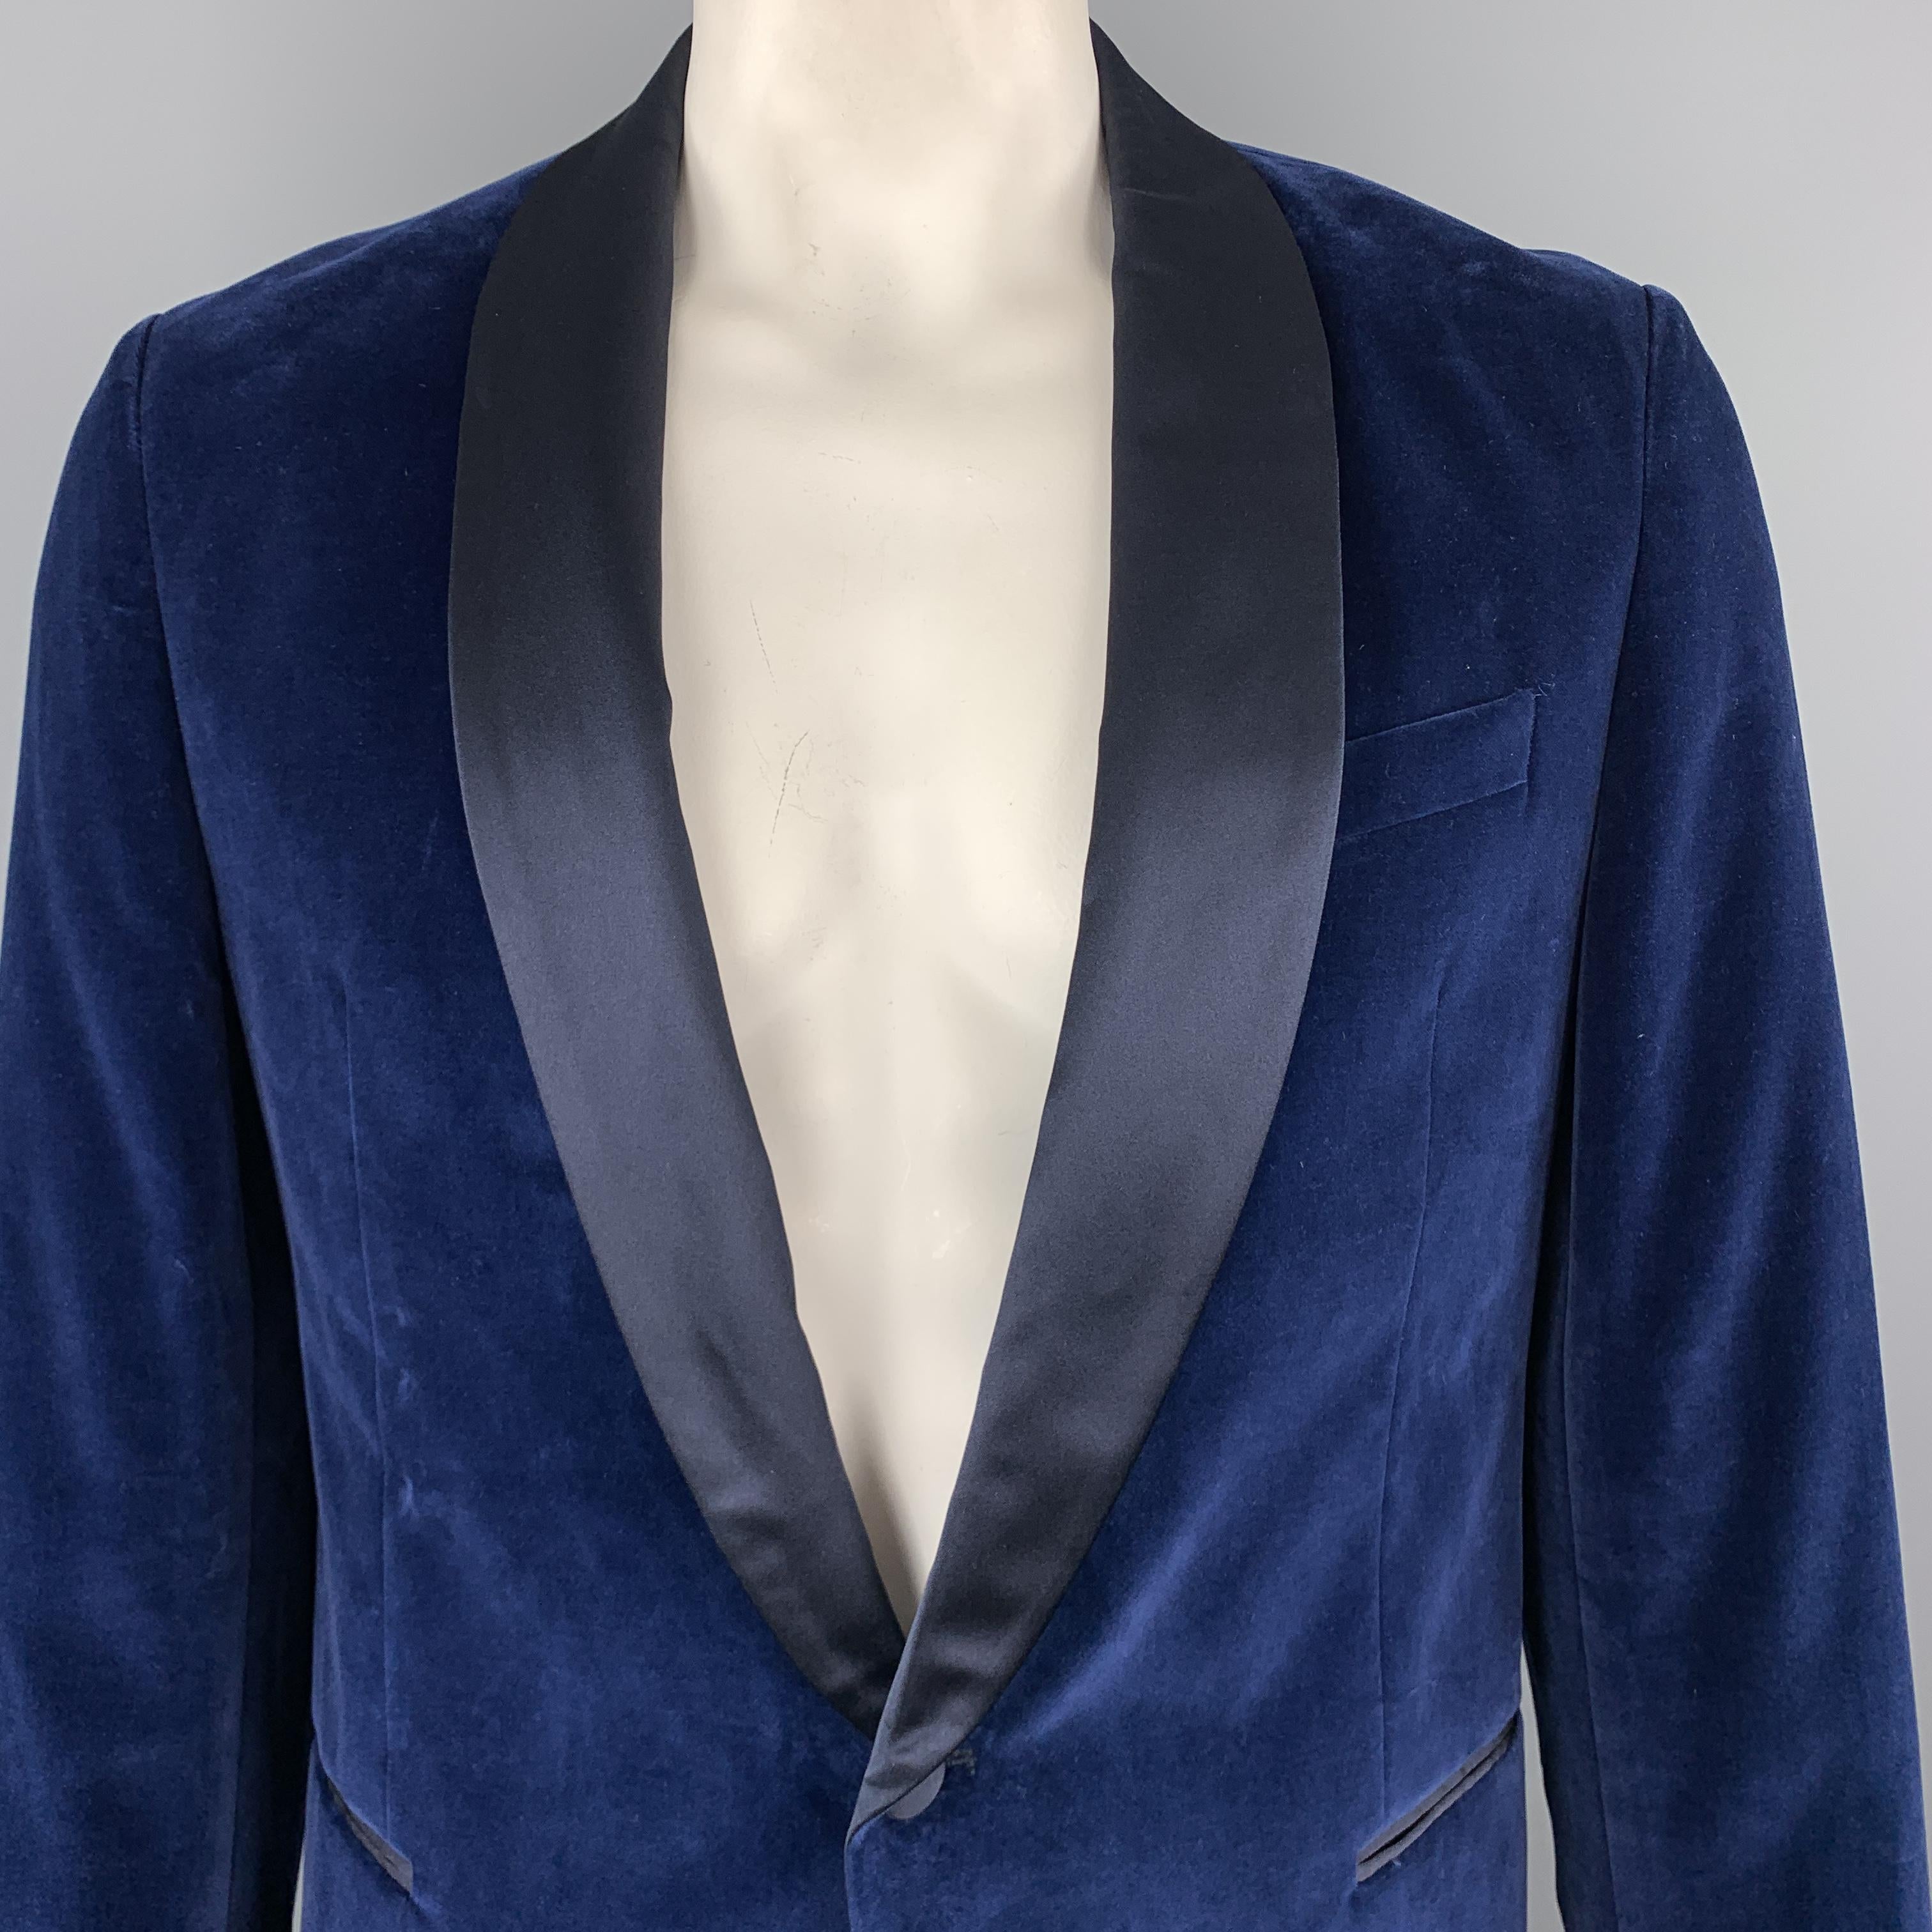 HUGO BOSS dinner jacket comes in blue velvet with a navy satin shawl collar and single breasted one button front. 

Good Pre-Owned Condition.
Marked: 44R

Measurements:

Shoulder: 18 in.
Chest: 44 in.
Sleeve: 27 in.
Length: 31 in.